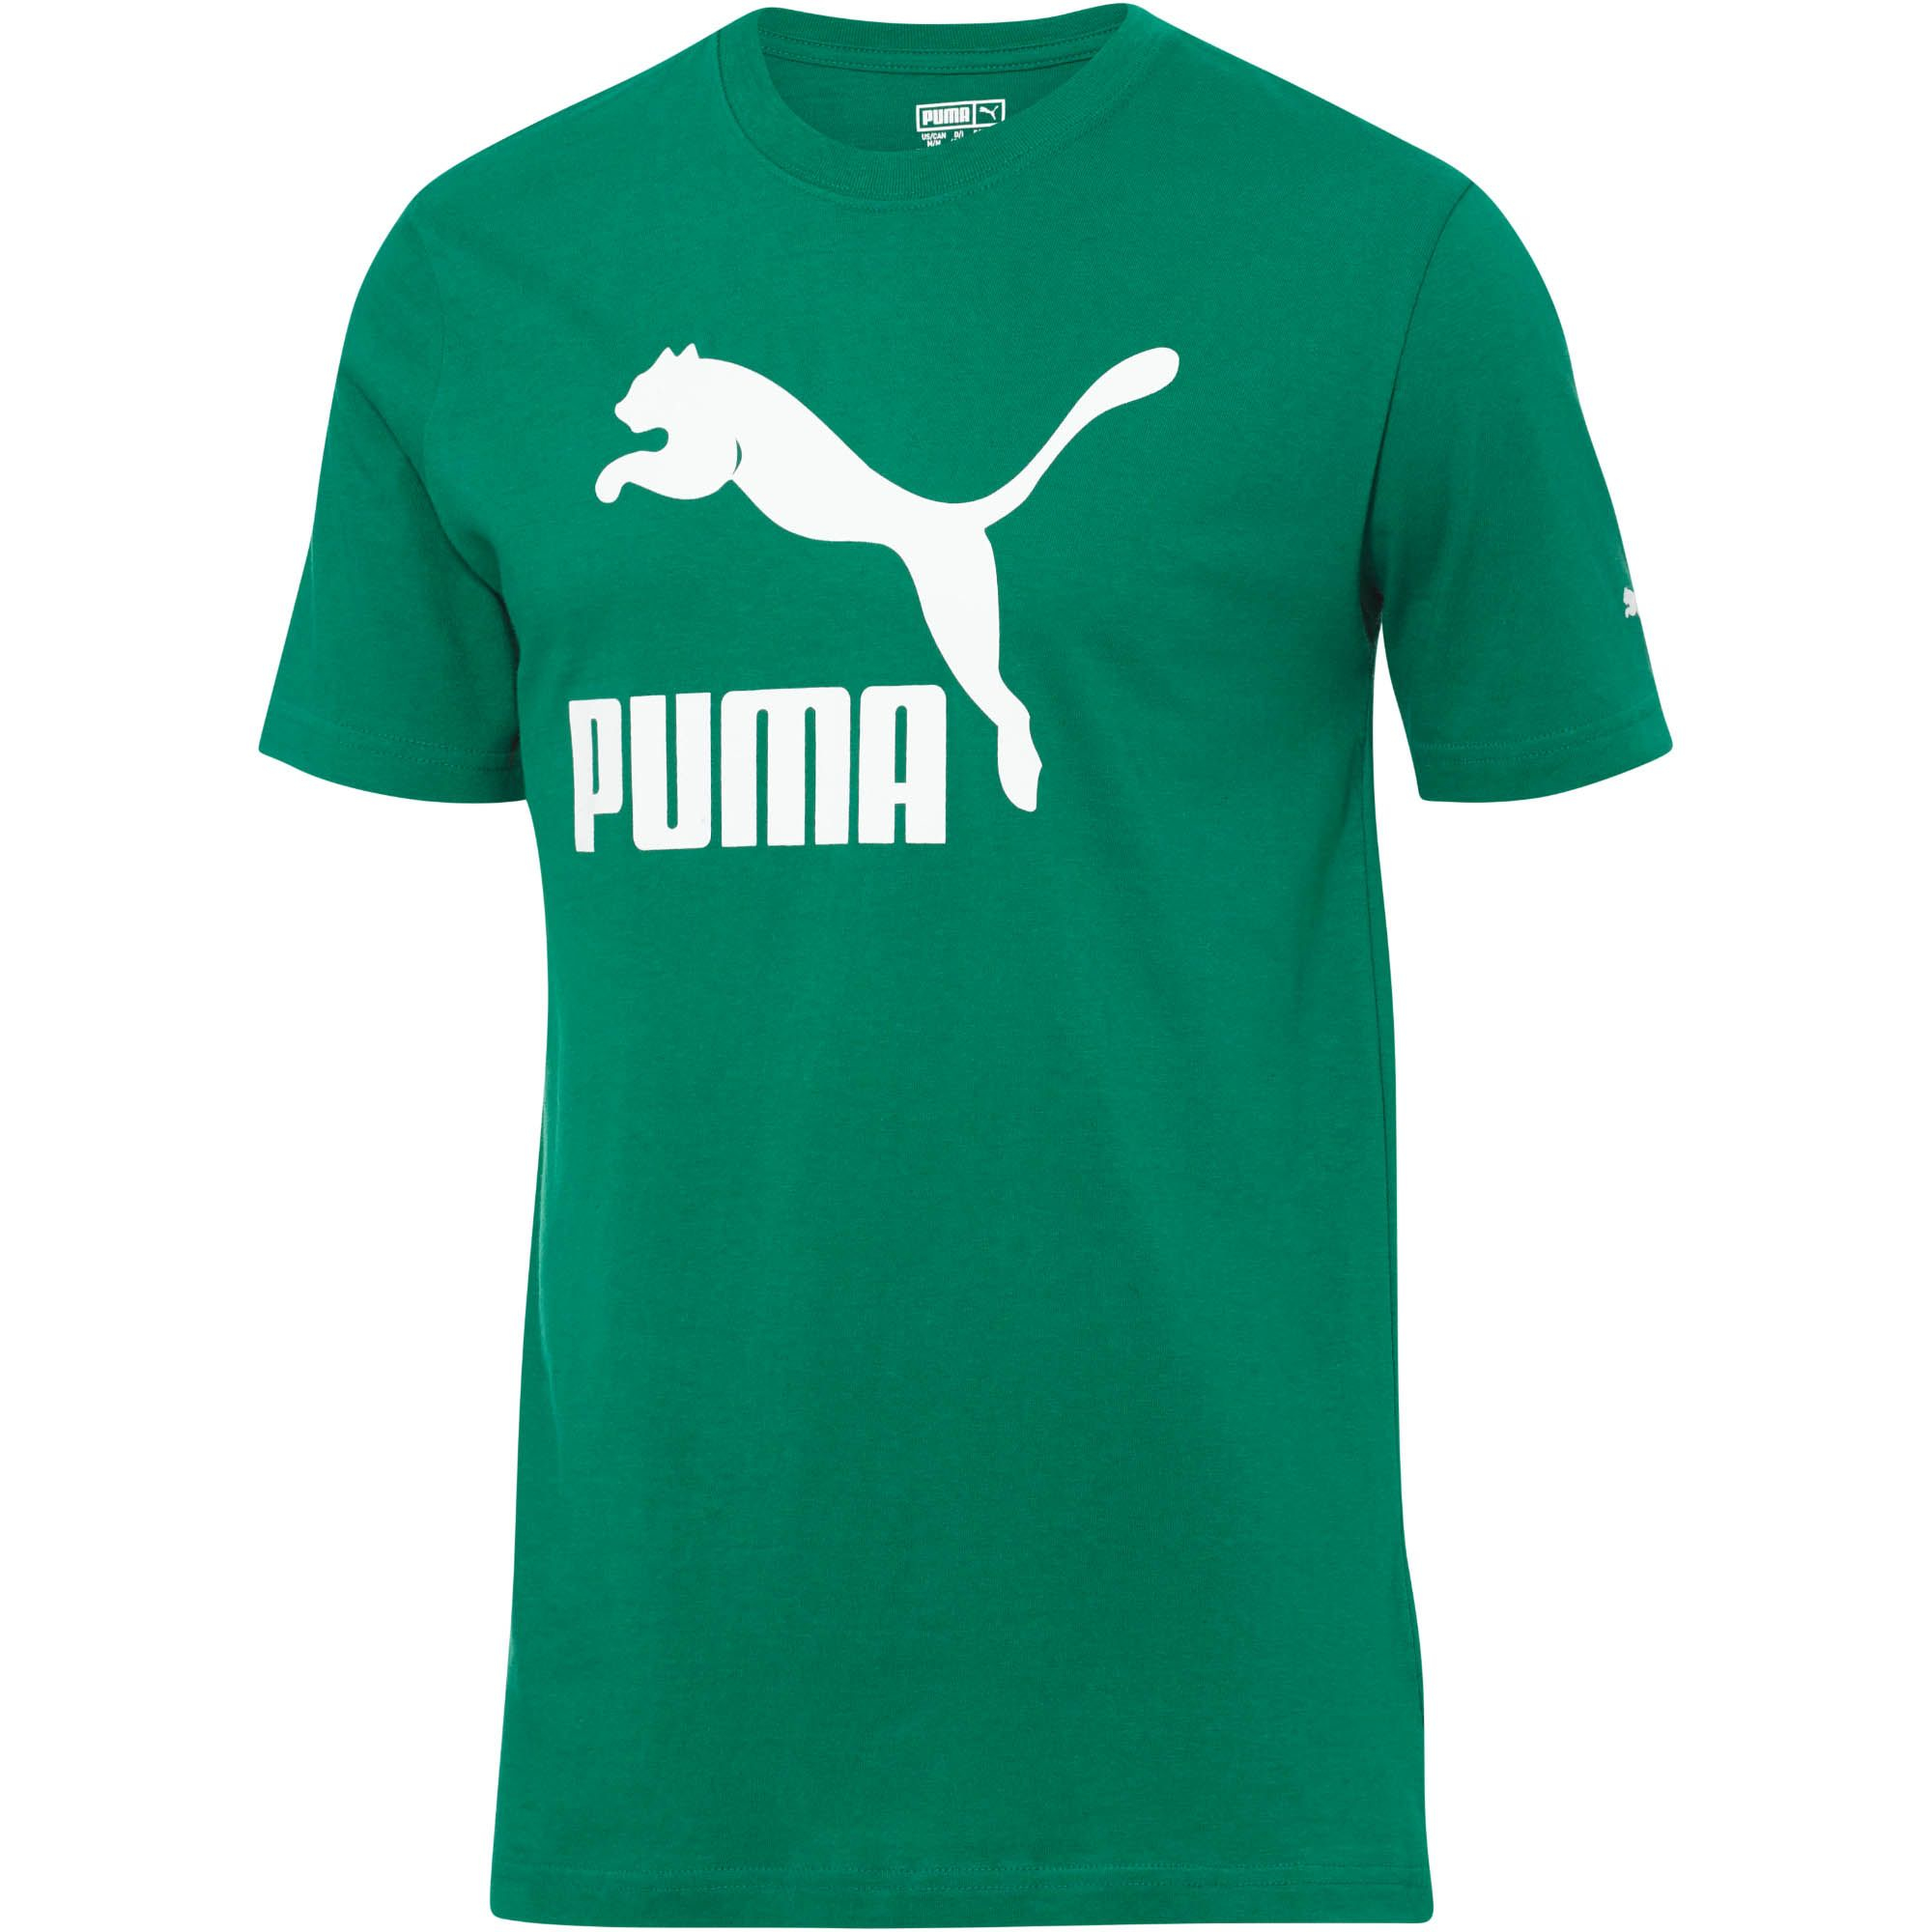 PUMA Cotton Archive Life T-shirt in Ultramarine Green-White (Green) for Men  - Lyst